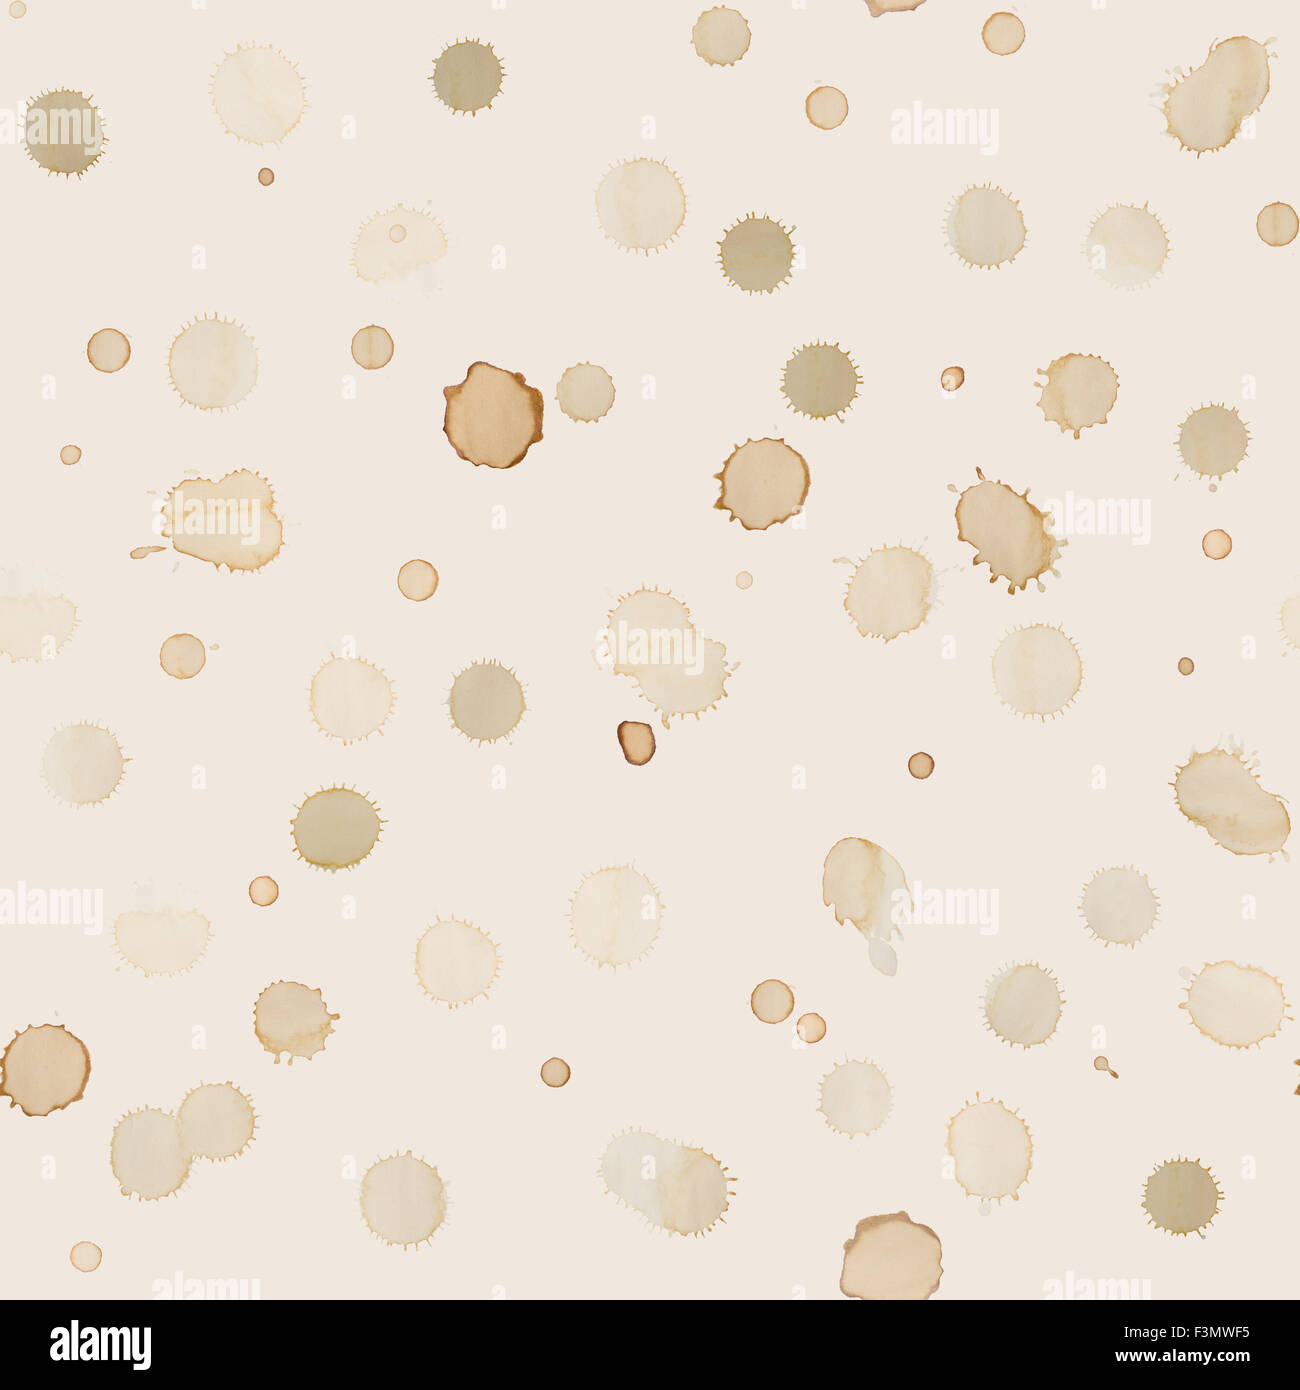 Coffee stains texture Stock Photo